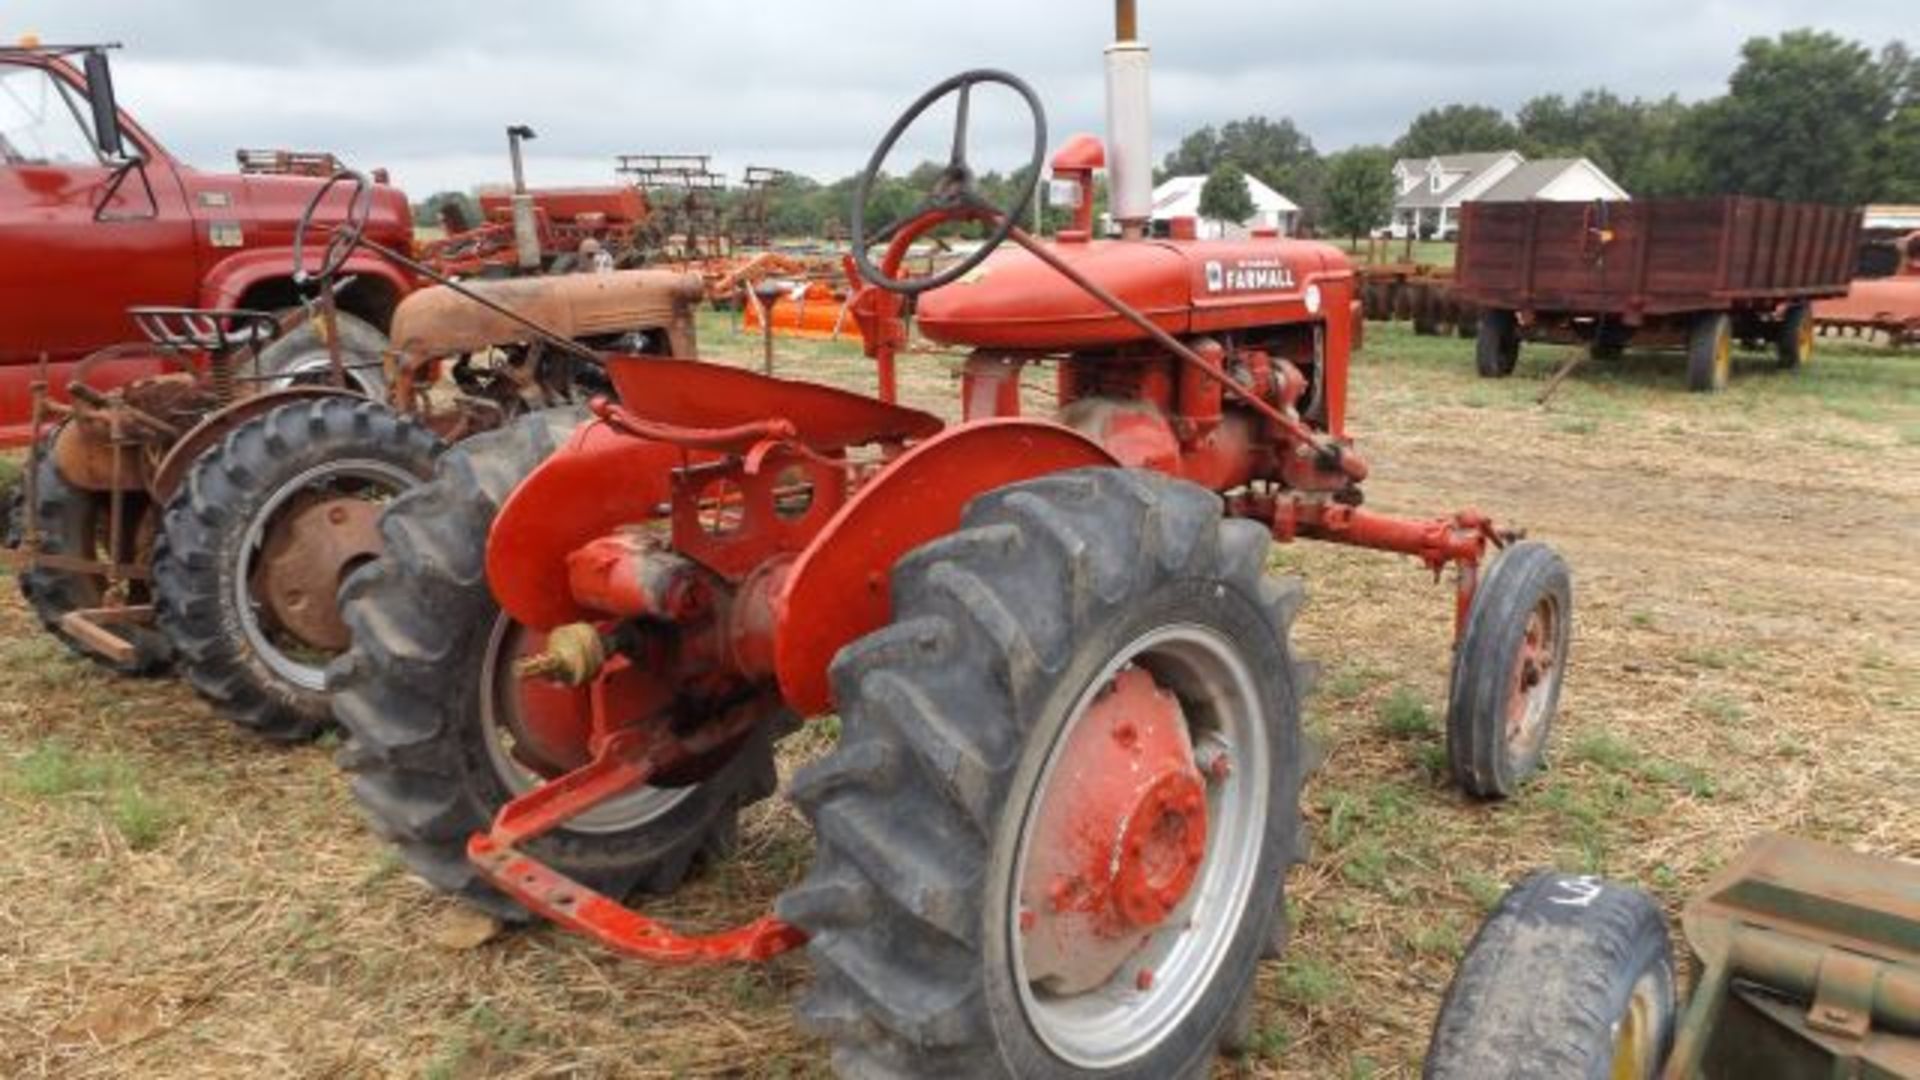 Lot 597 Farmall A Tractor, 1939 - Image 3 of 3